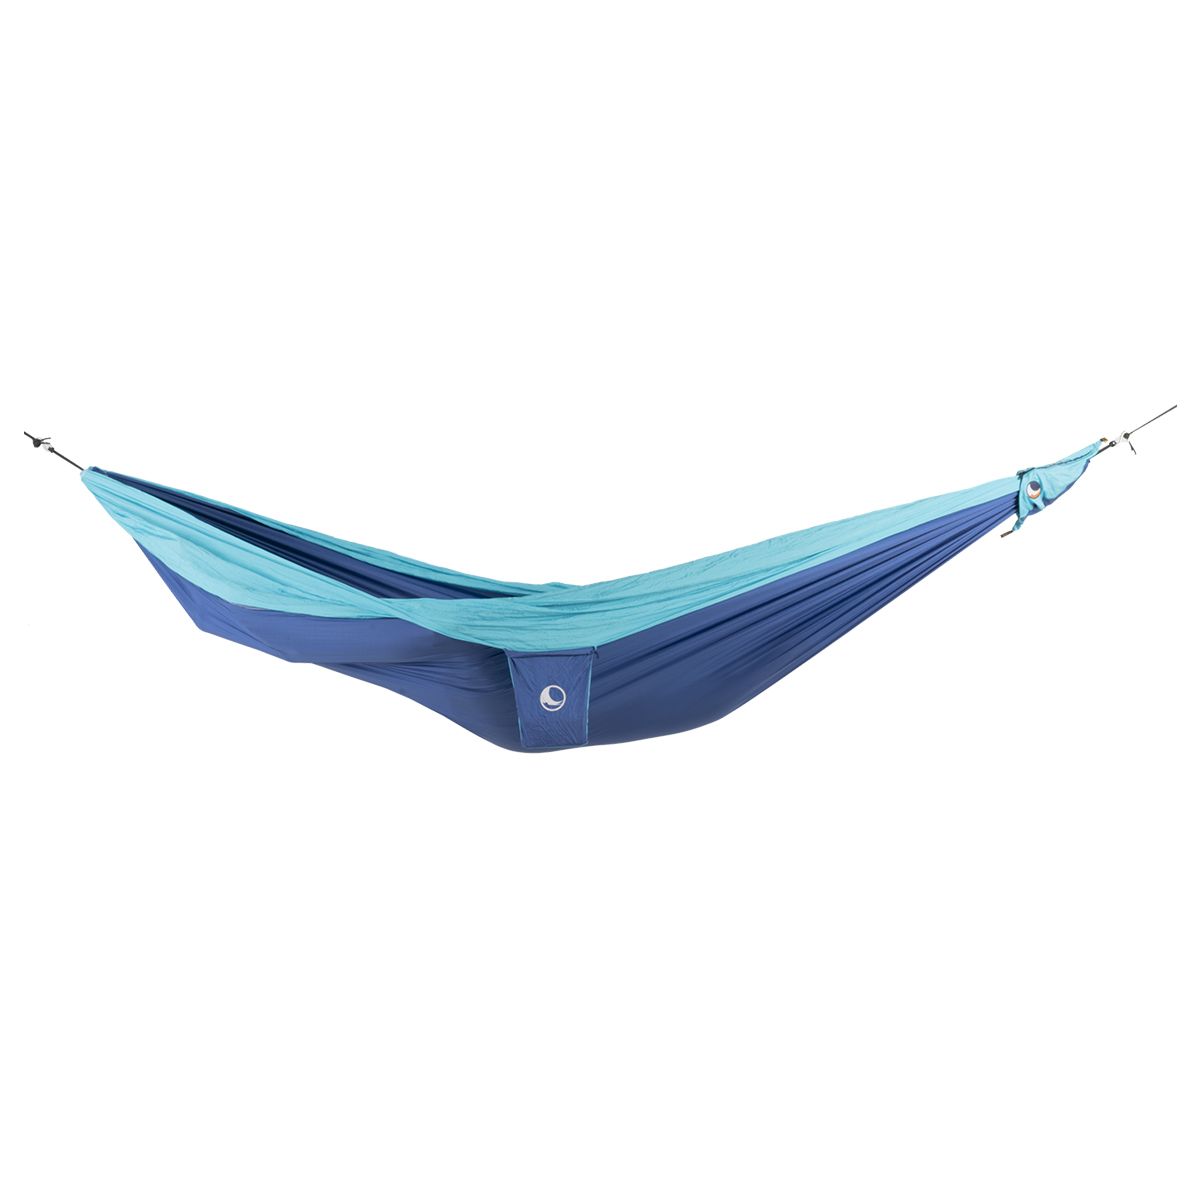 Ticket to the Moon King Size Hammock Blue/Turquoise